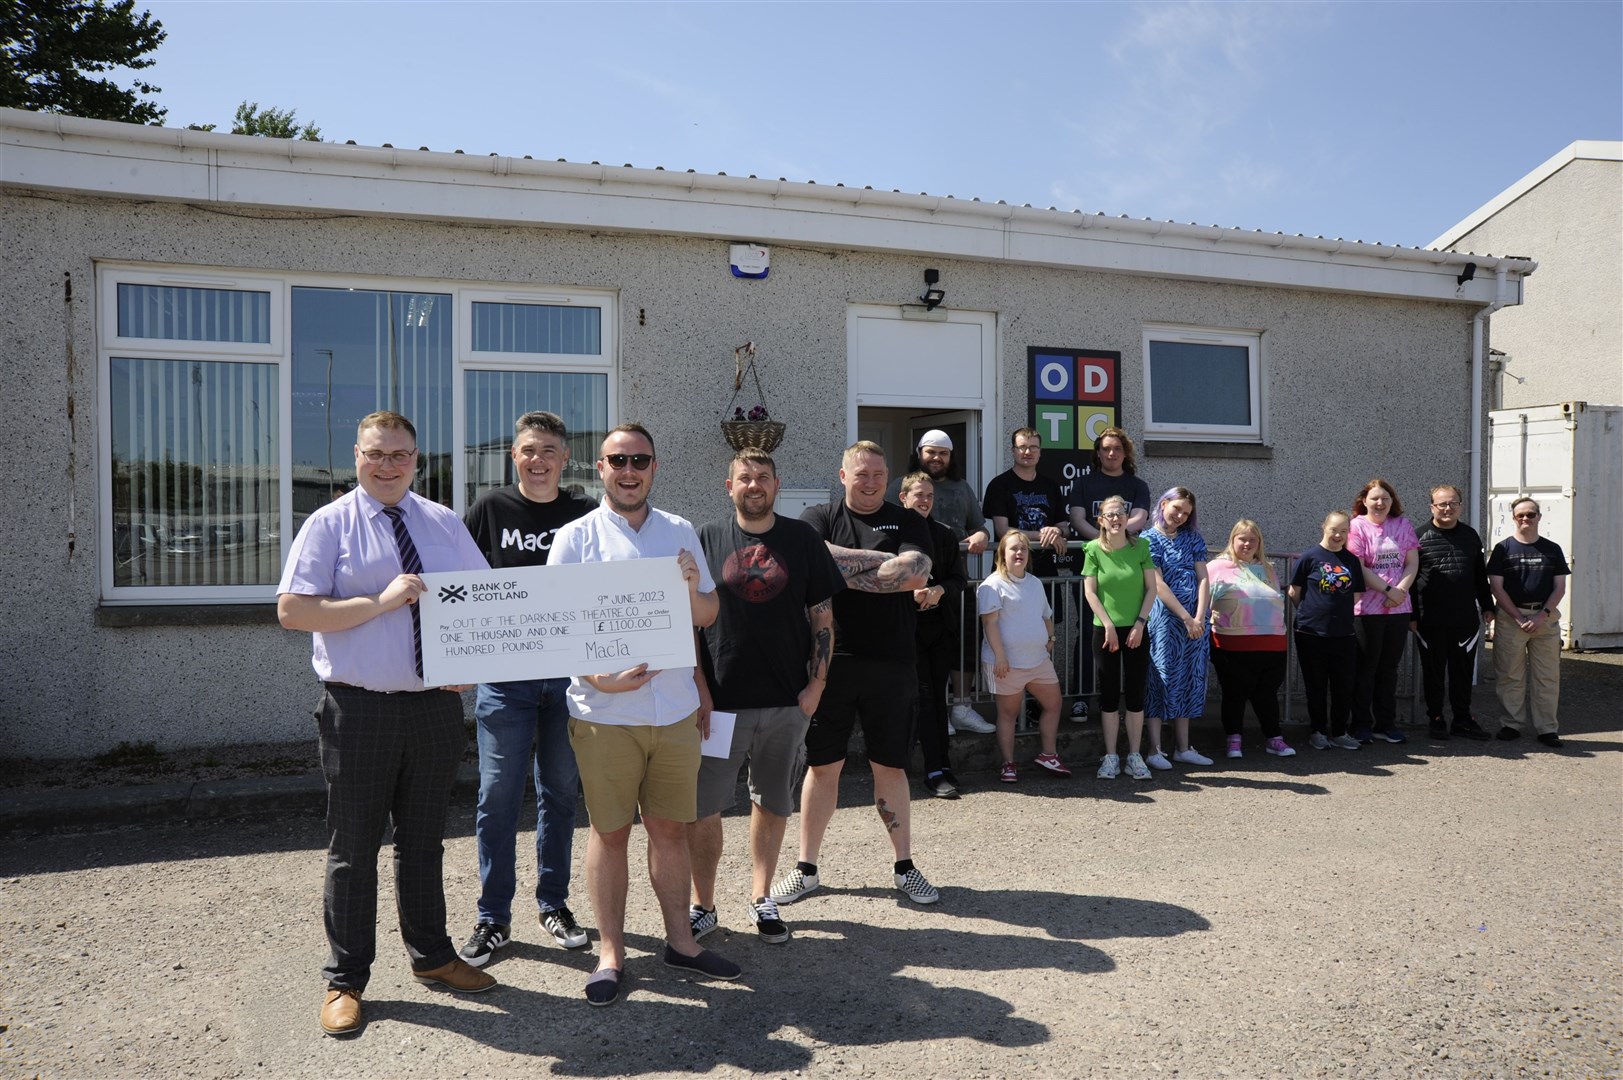 Local band MacTa visited Out of the Darkness Theatre company to present them a cheque for £1100.